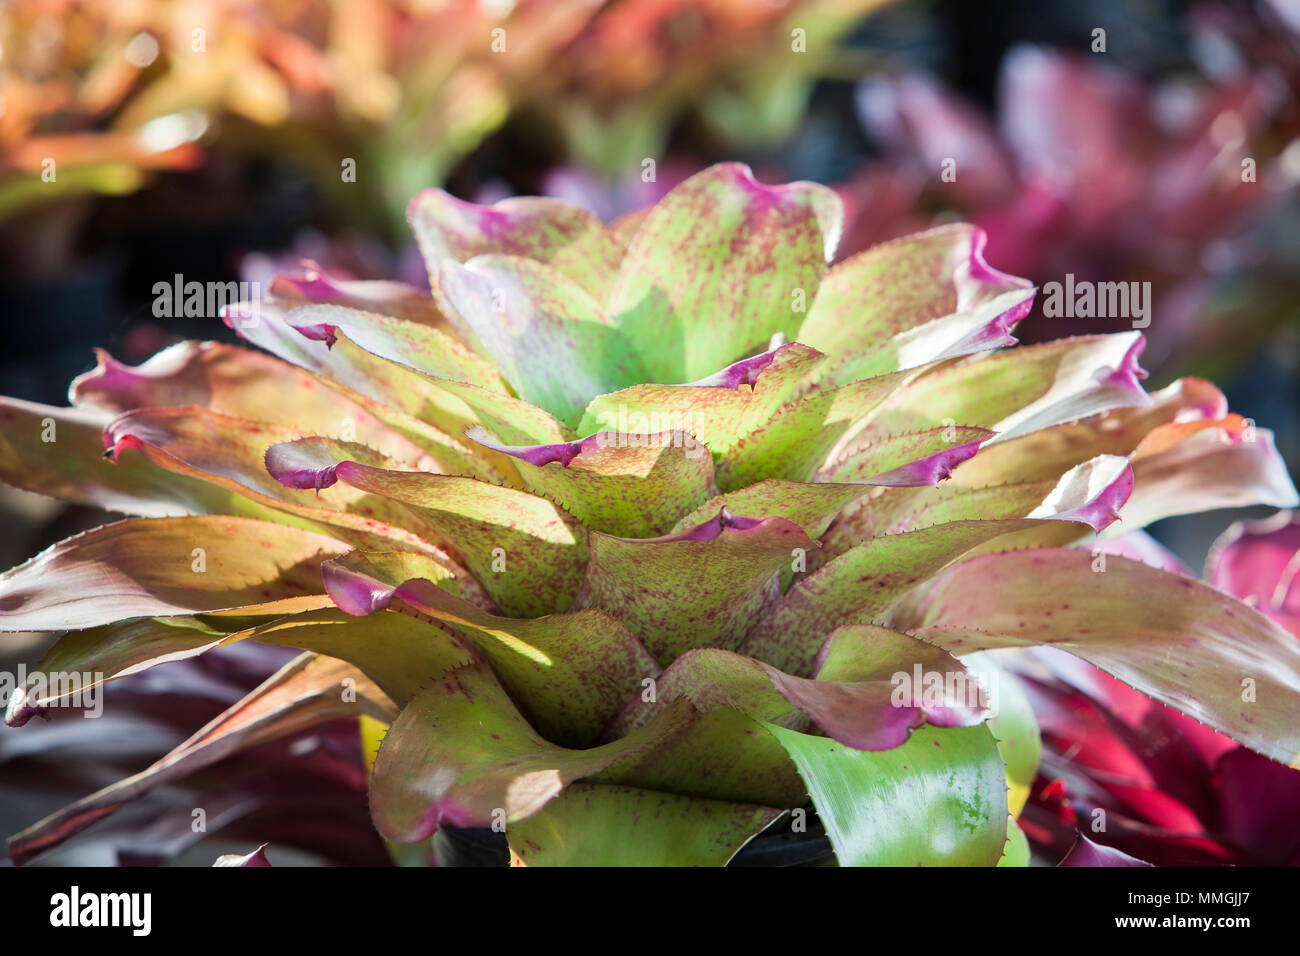 Bromeliad flower in the garden with nature,Bromeliad flower in various color in garden for postcard beauty decoration and agriculture concept design. Stock Photo